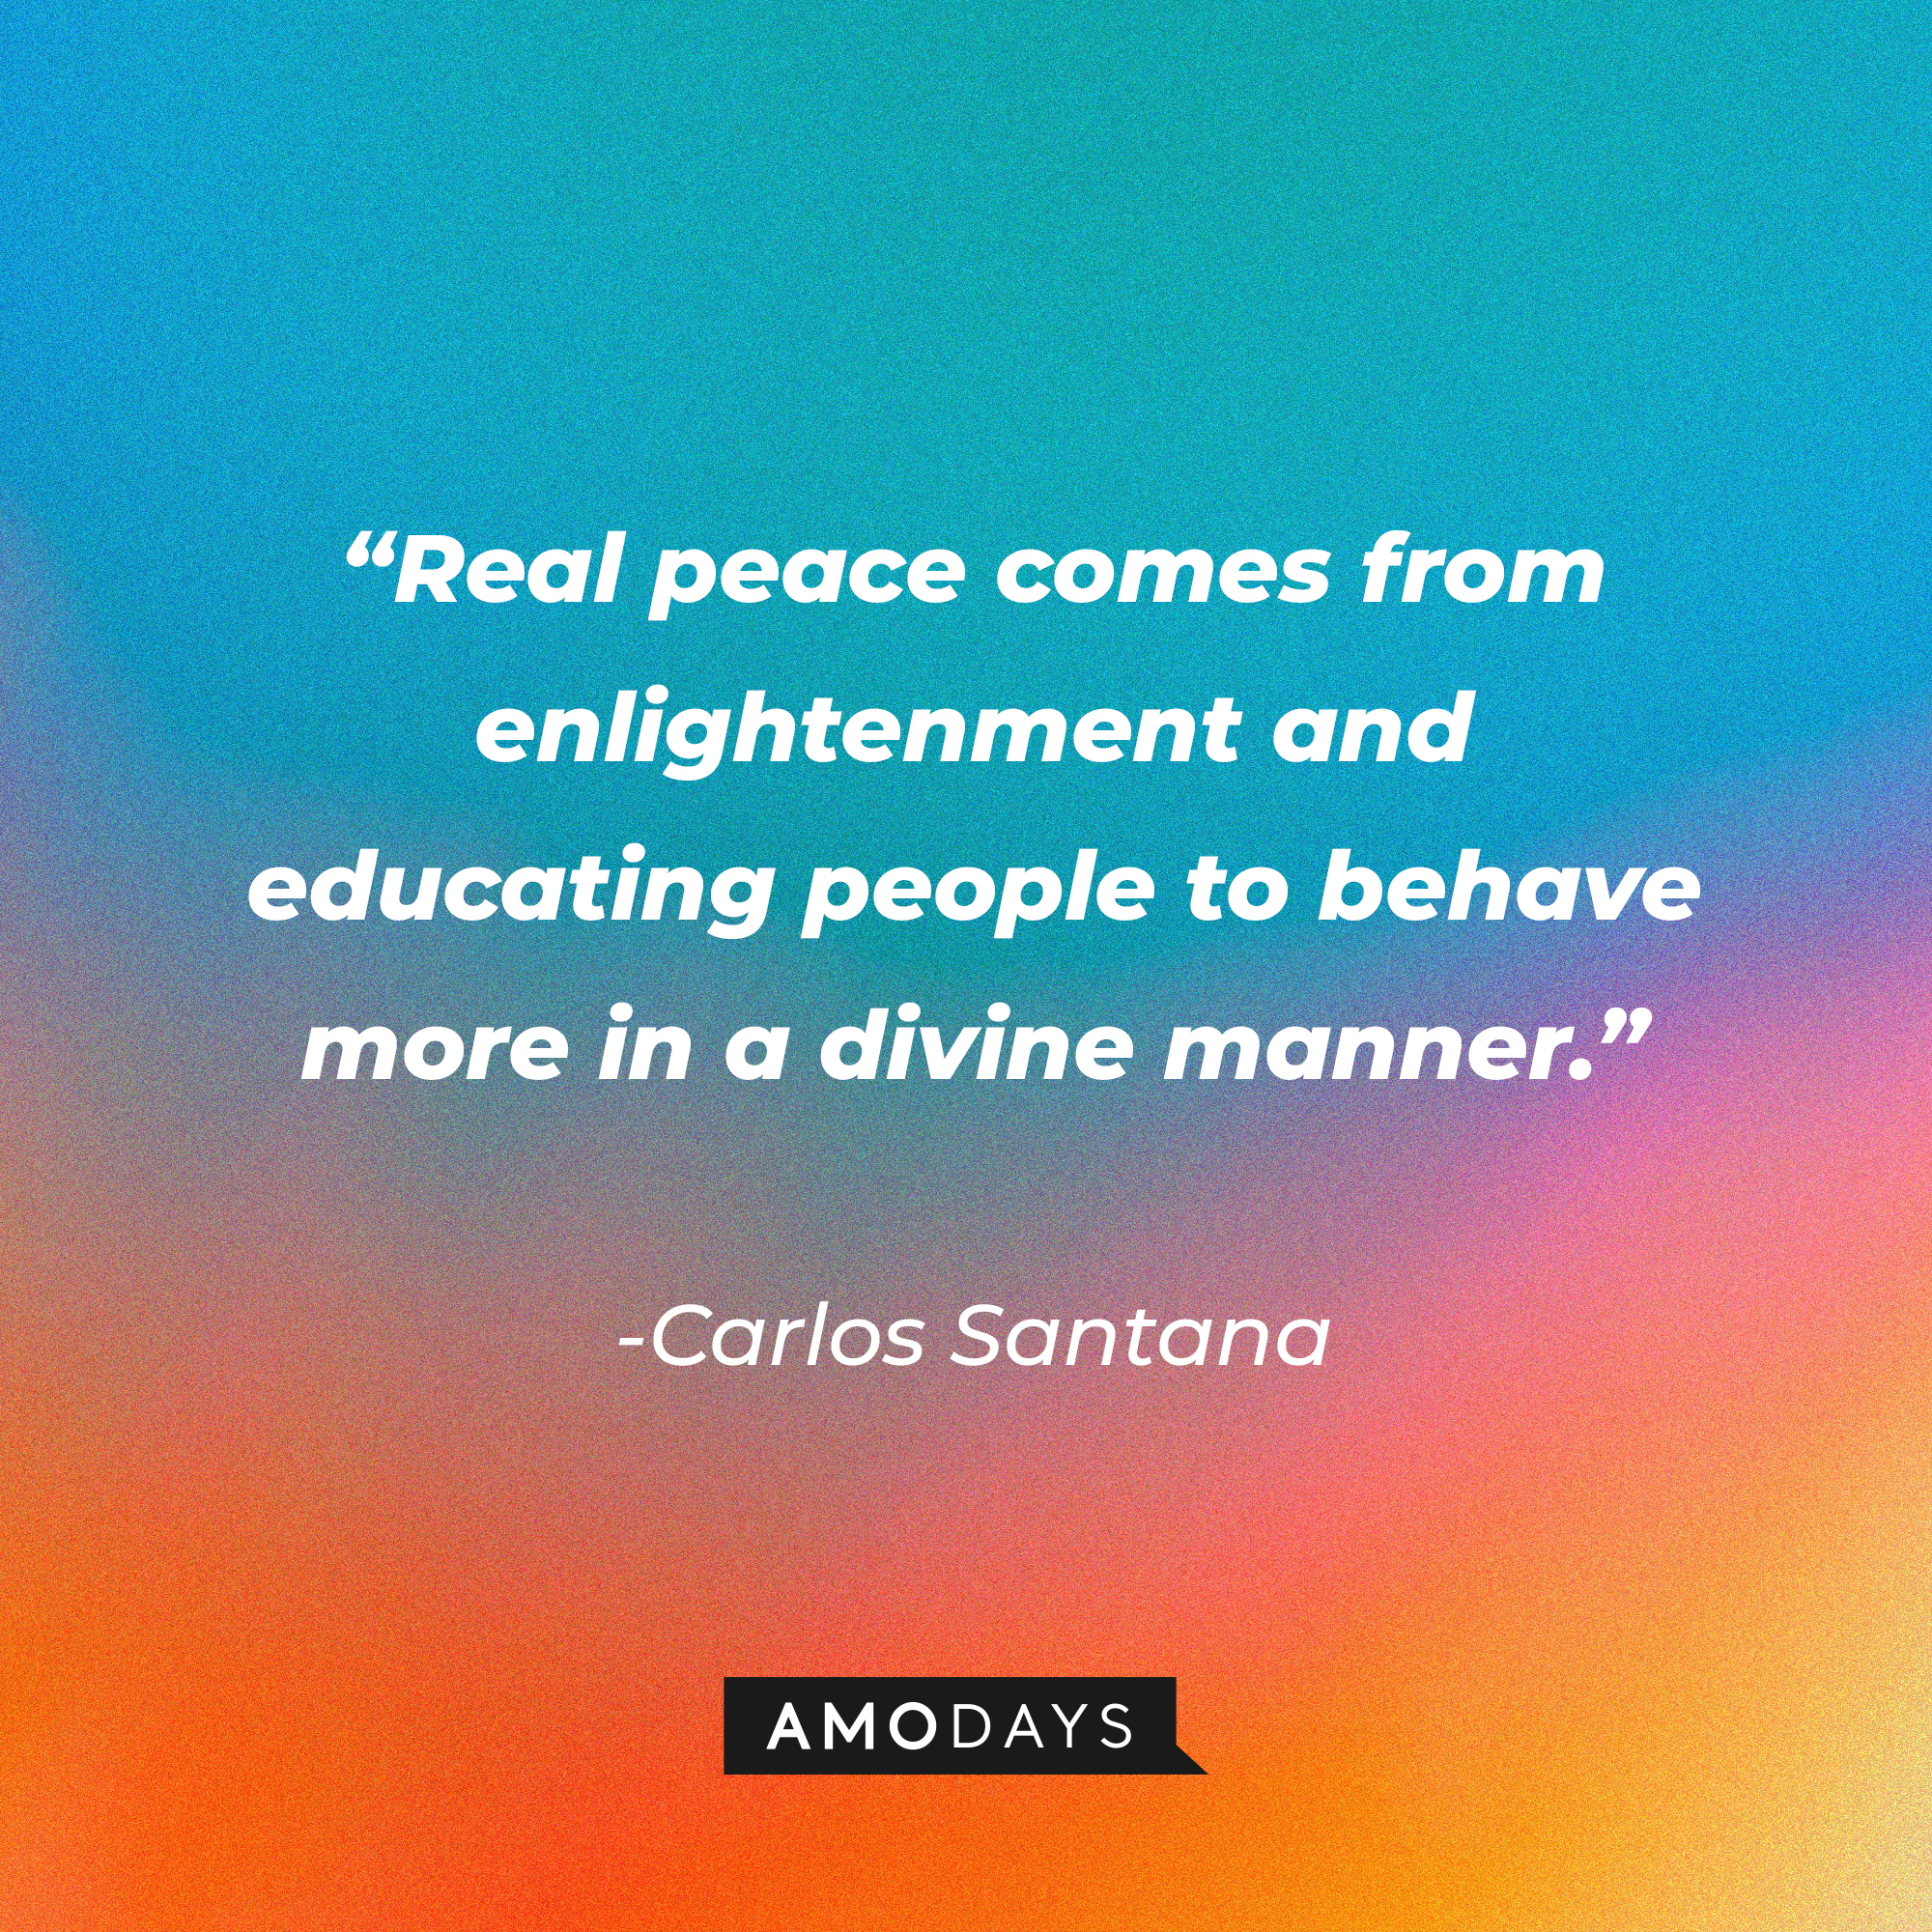 Carlos Santana’s quote: “Real peace comes from enlightenment and educating people to behave more in a divine manner."┃Source: AmoDays